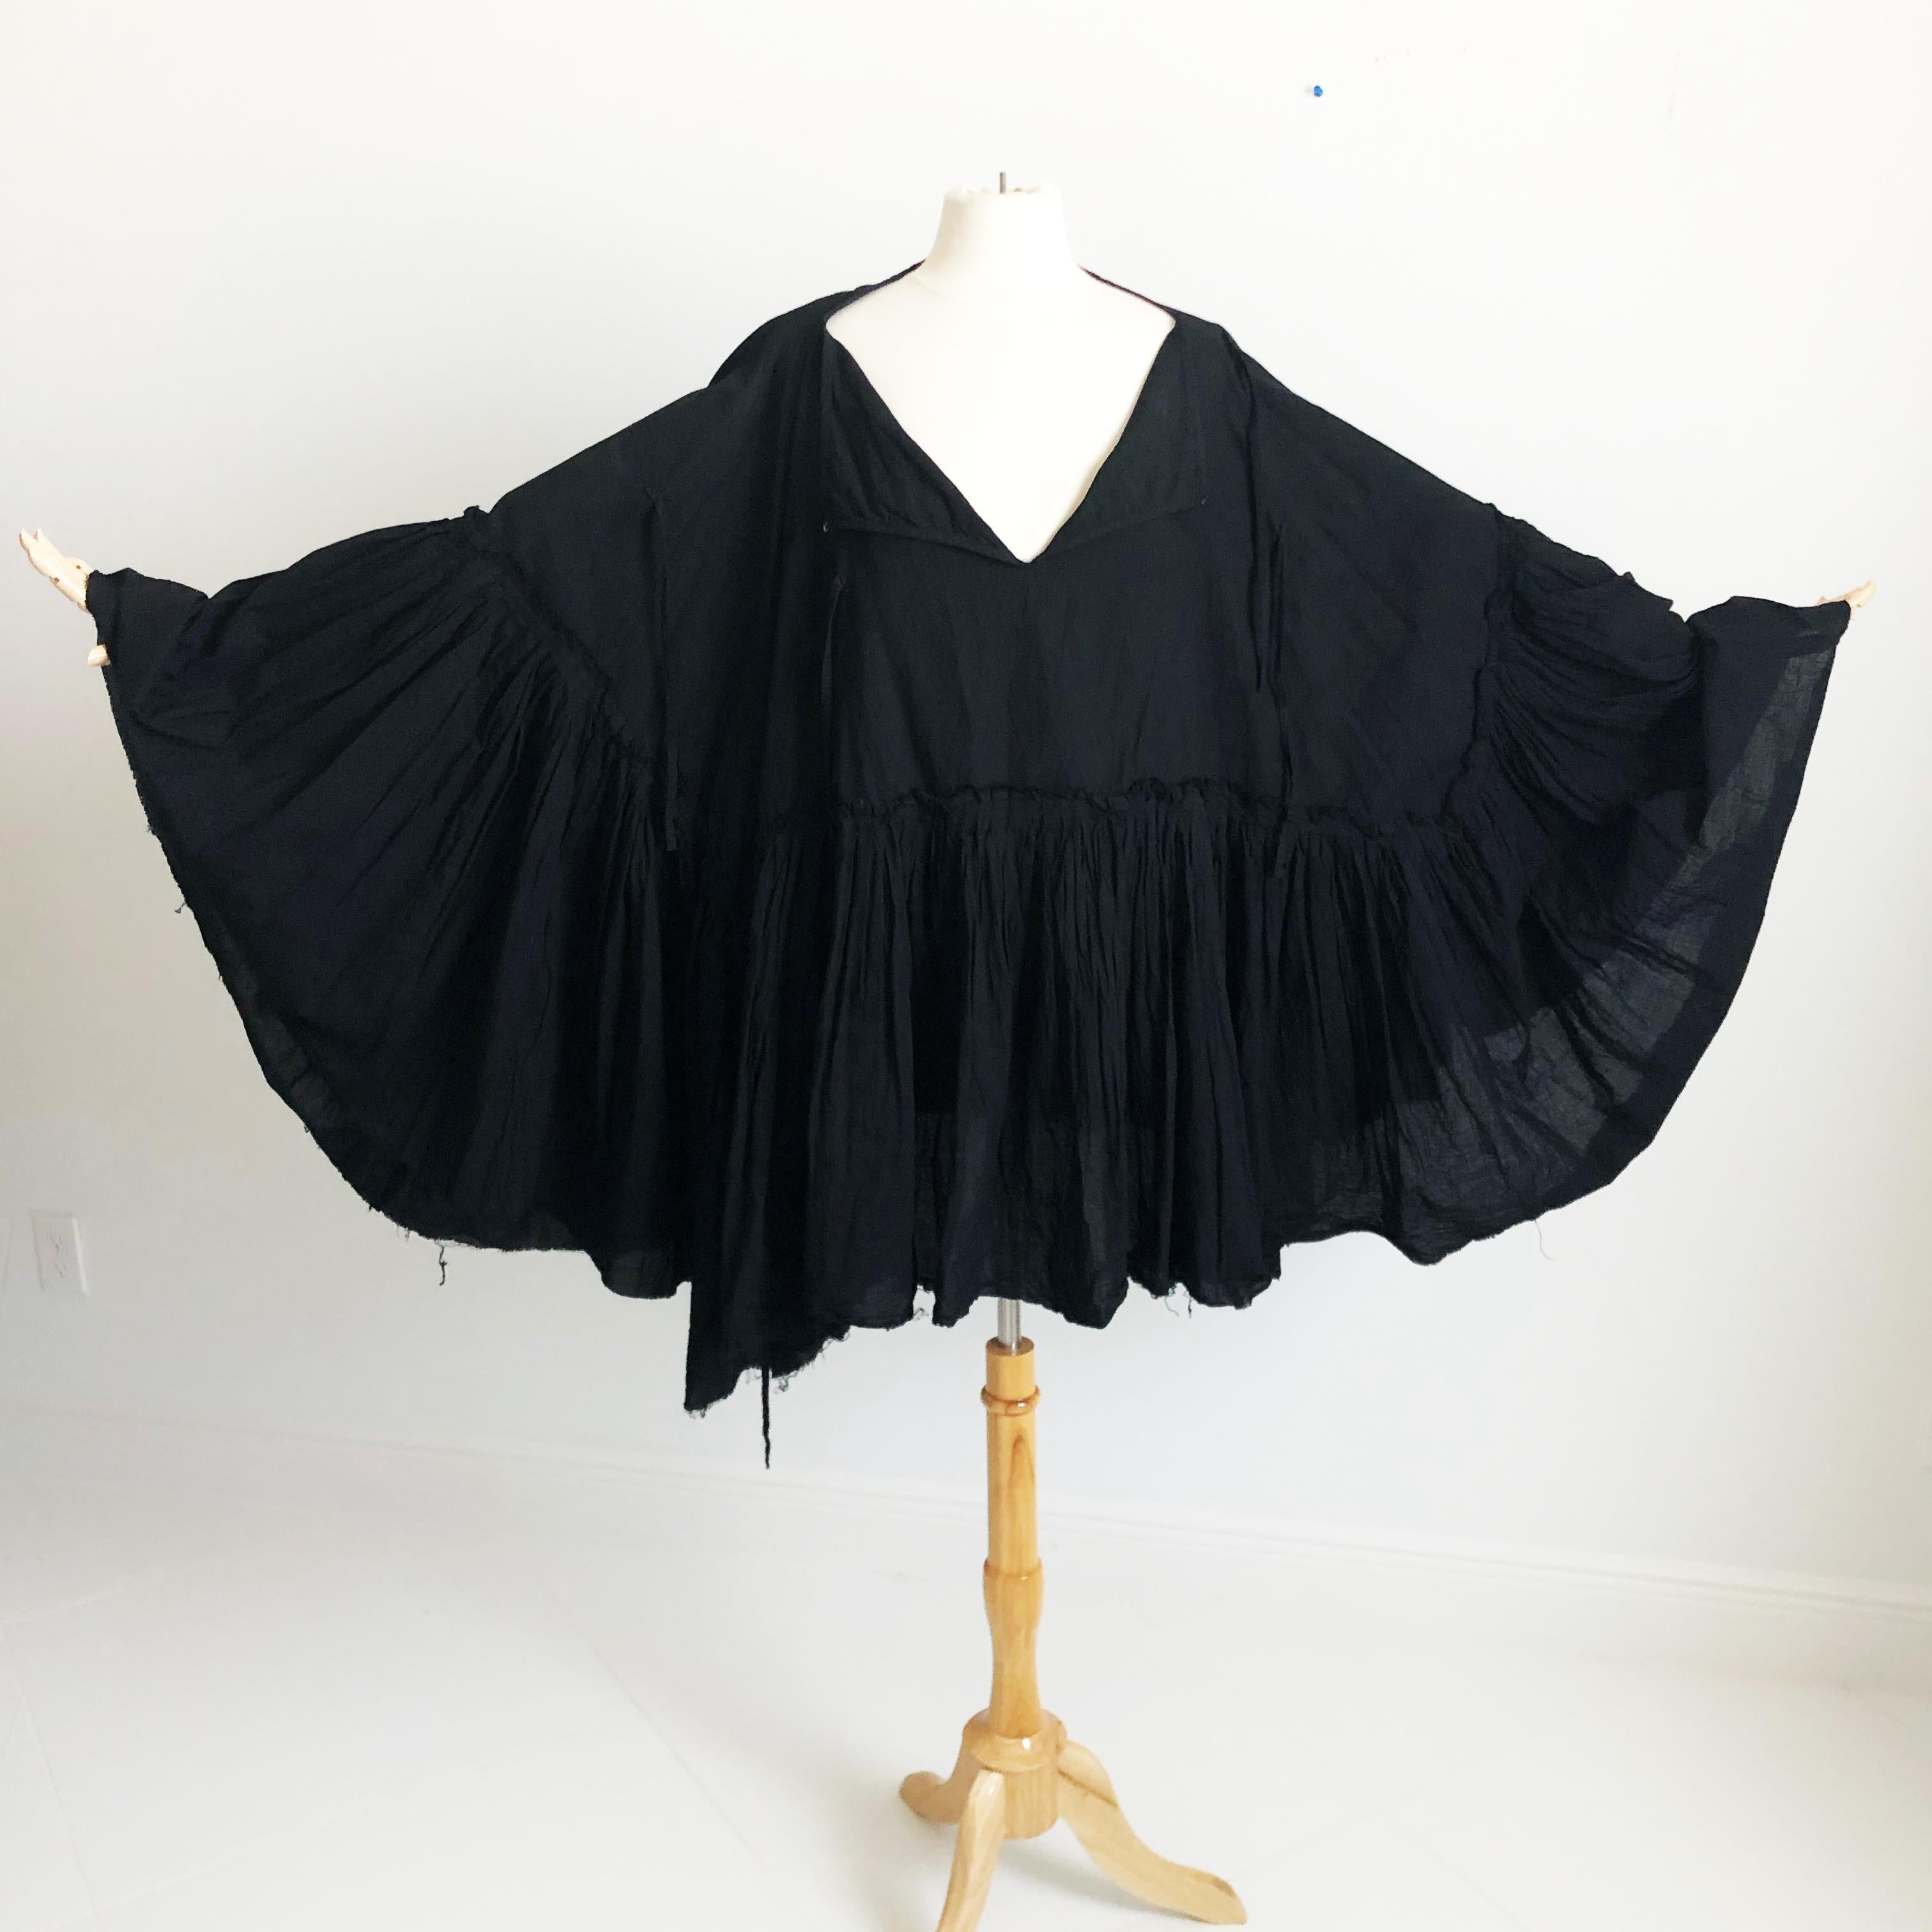 Authentic, preowned Junya Watanabe Comme de Garcons black cotton ruffle poncho, tagged size M. Hard to find style. Massive amount of cotton fabric & features several ties enabling a variety of looks with hook/eye closure at neckline. 

A chic